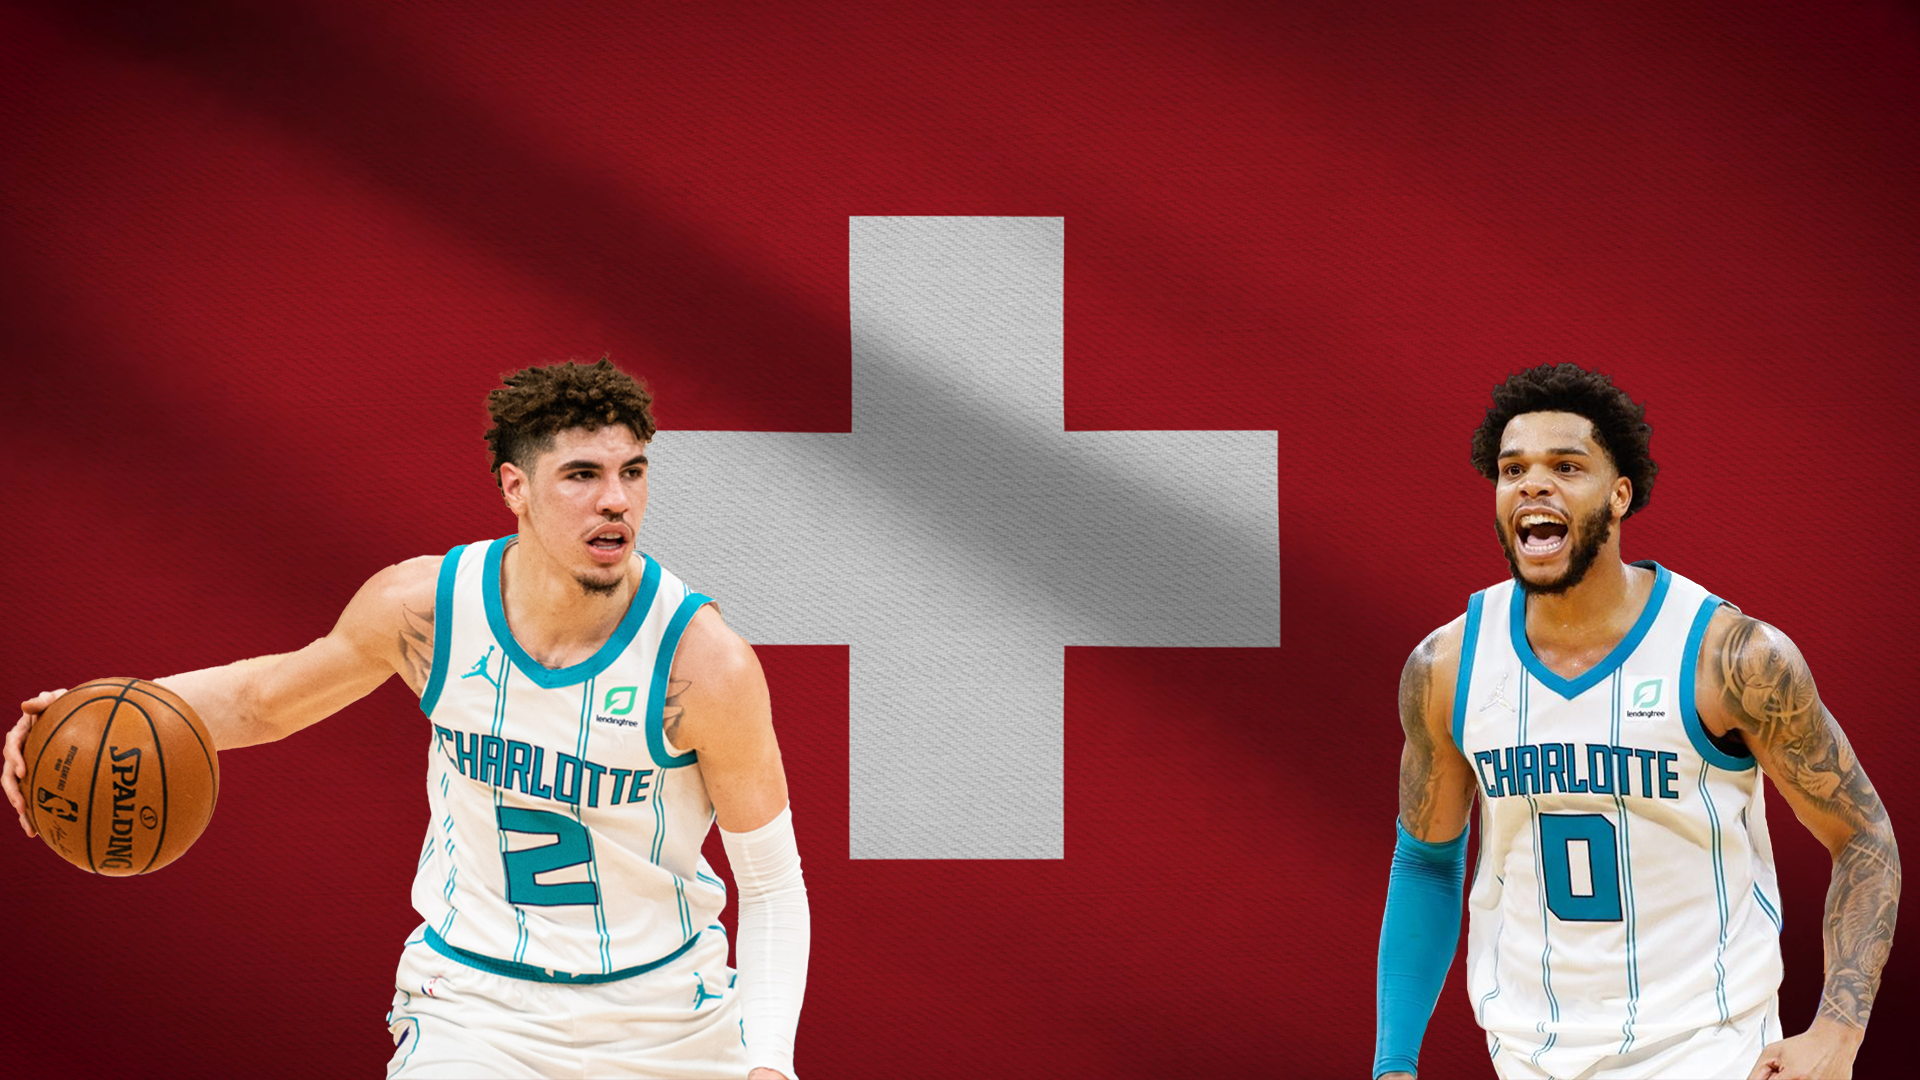 Hornets Suisse